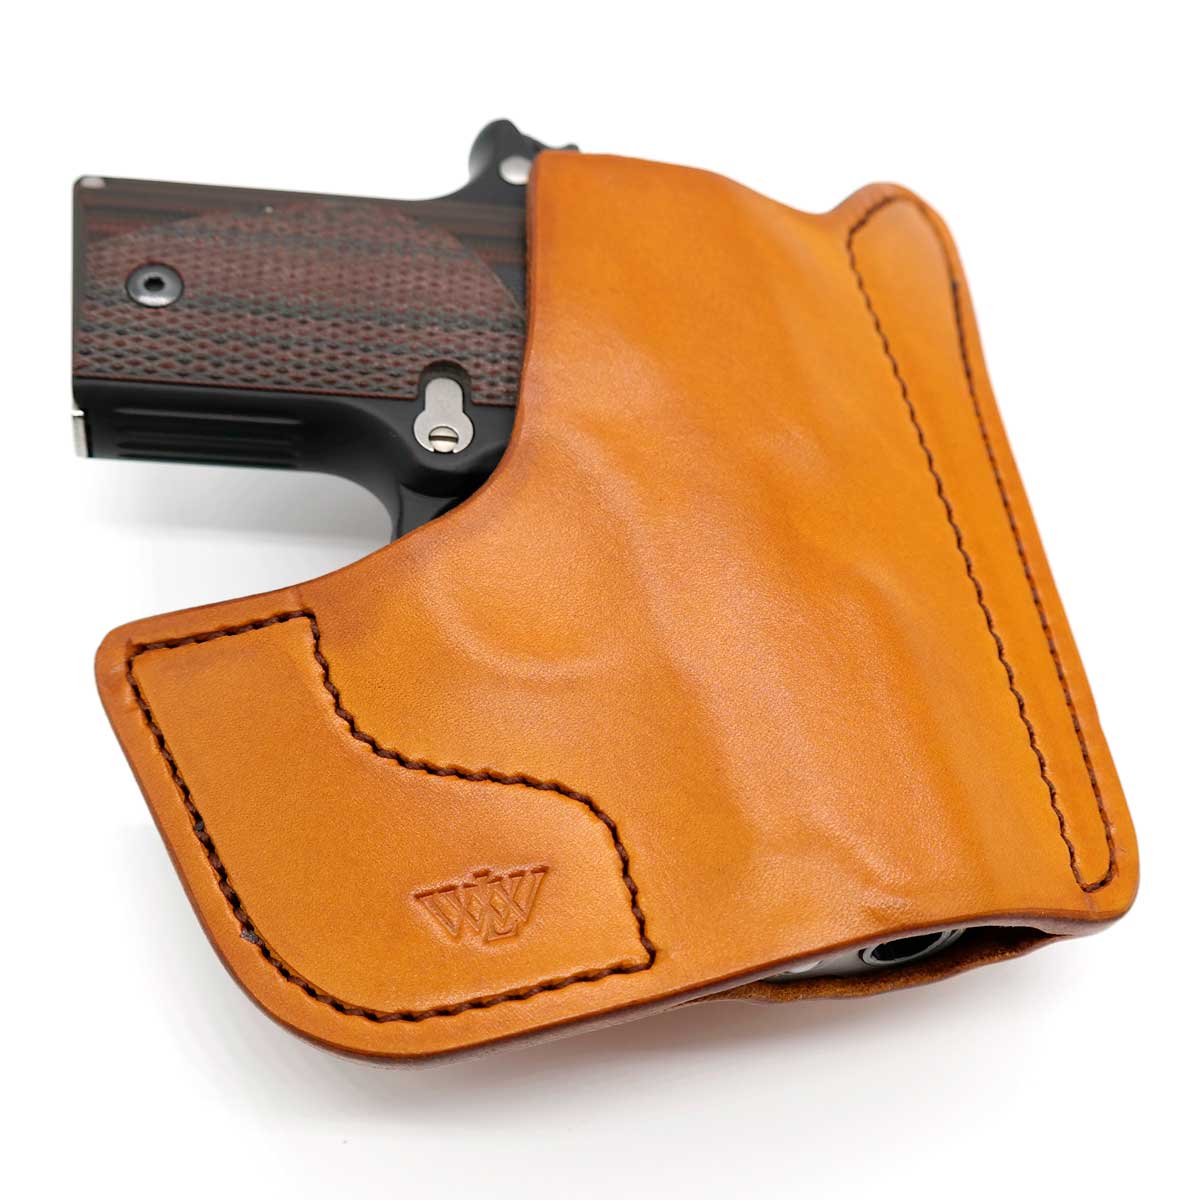 Leather holster for .38 snub nose, Snubnose, .38 holster, Leather Hols –  Rising Star Forge and Leather Works